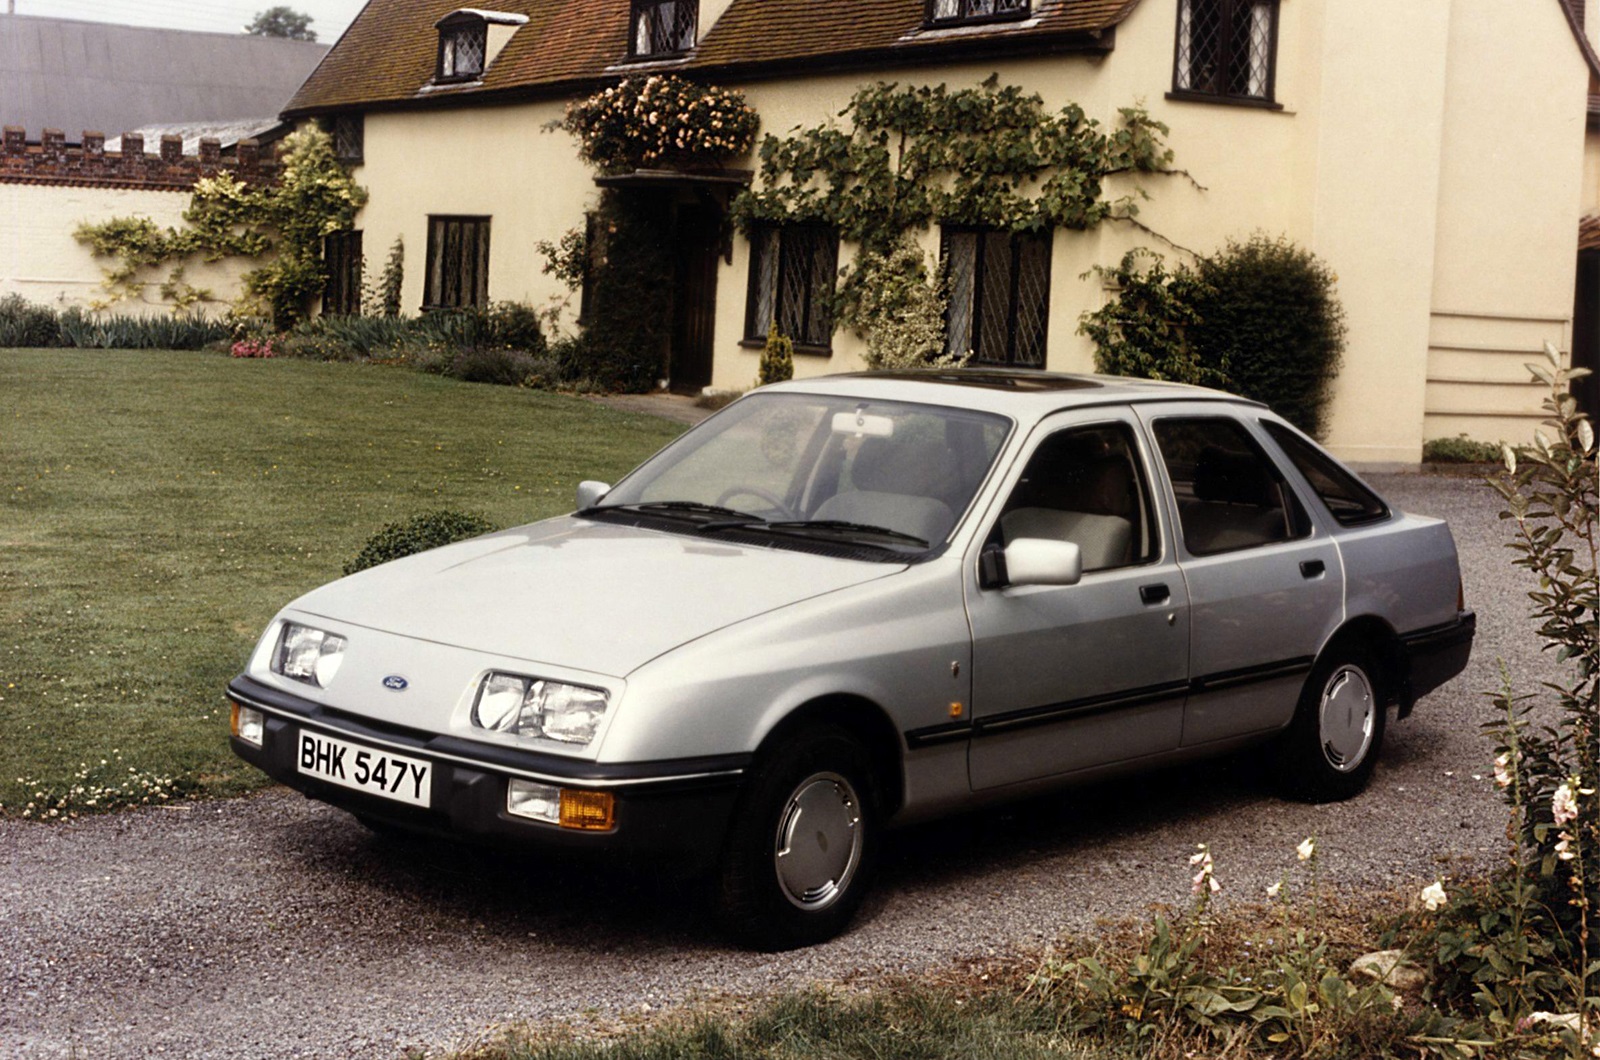 <p>Like the Granada, the Sierra was a one-size-fits-all solution to replacing overlapping models made by Ford’s British and German divisions. It stood out from the <strong>Taunus</strong> and the <strong>Cortina</strong>, its predecessors, with an aerodynamic design that left no one indifferent. Some loved it, and others hated it; few ignored it.</p><p>Ford built the Sierra for over a decade in <strong>more than half a dozen countries</strong>. The range included two- and four-door liftbacks, a four-door saloon, an estate, and even a pickup called <strong>P100</strong>. Rear- and four-wheel-drive variants were offered, and a range-topping model tuned by <strong>Cosworth</strong> arrived in 1988. In hindsight, the Sierra managed to represent all facets of Ford during the 1980s, and helped the company to dominate the UK car market, where its market share hovered consistently around the <strong>30% </strong>mark.</p>